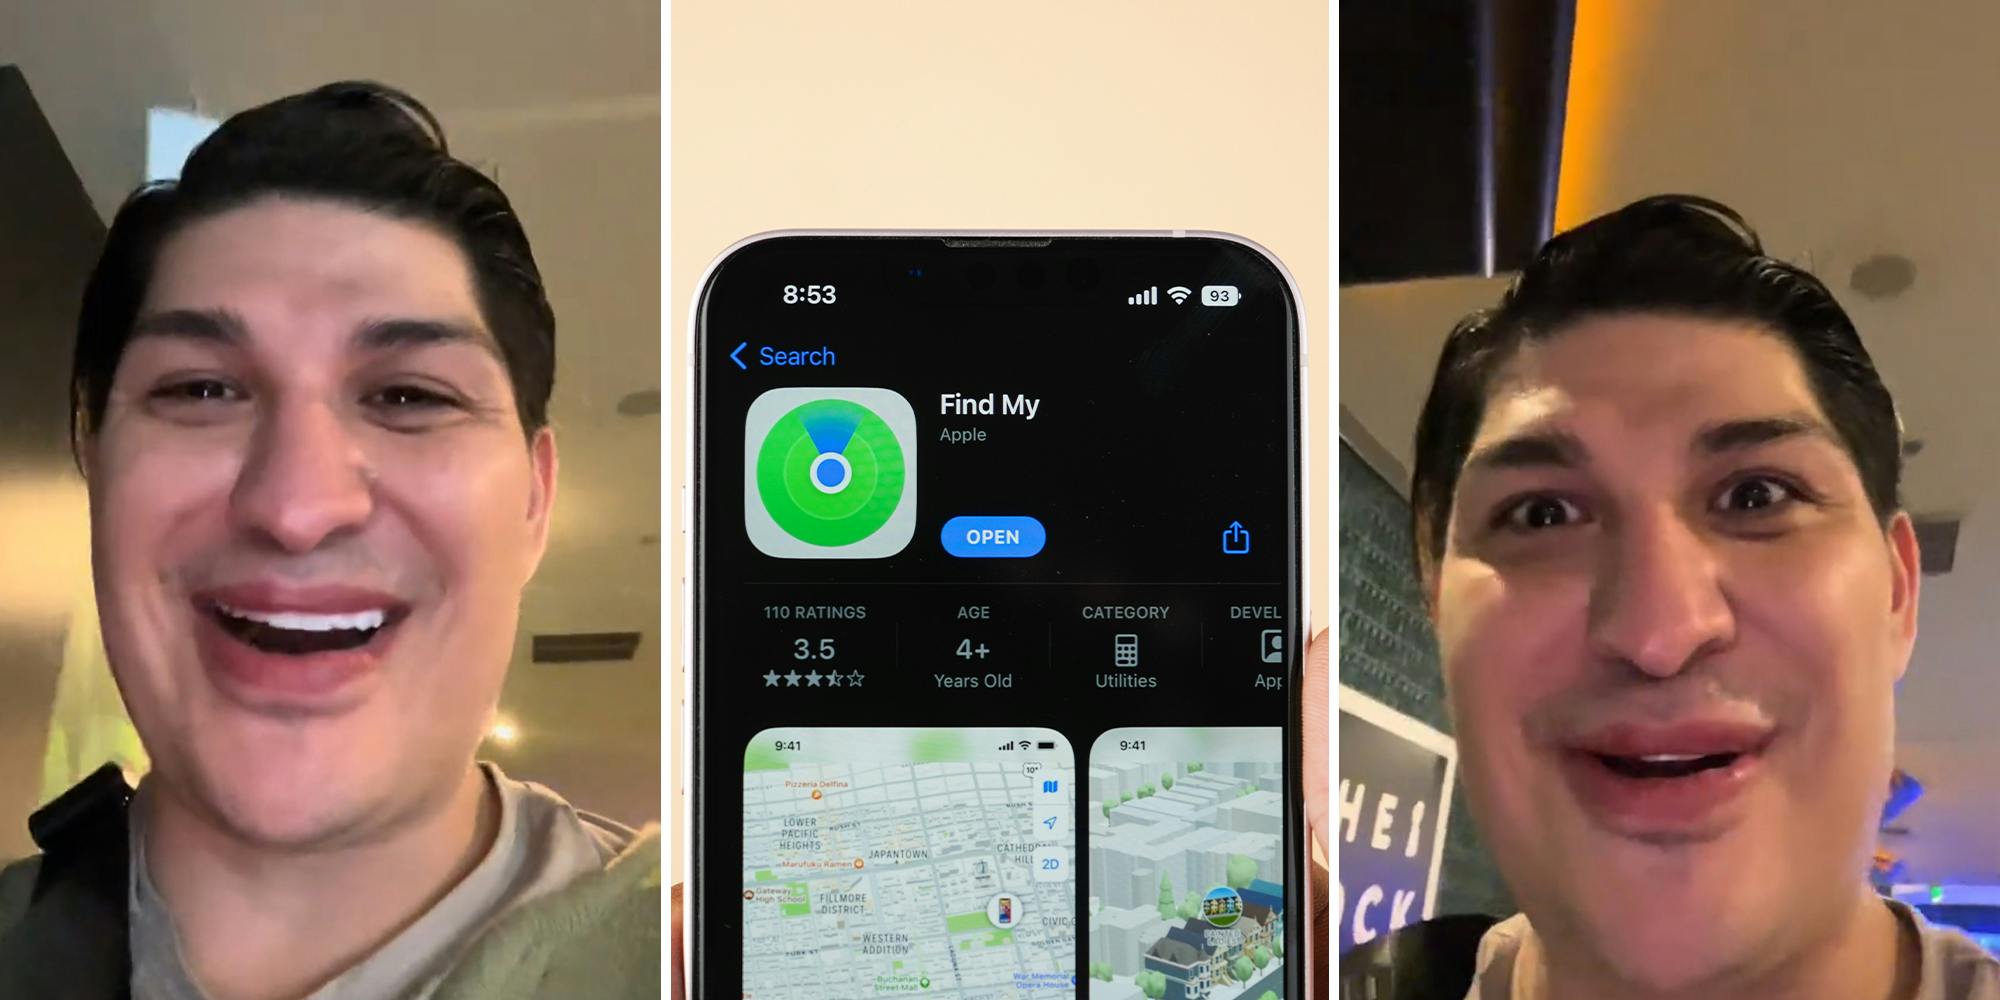 Man gets revenge on phone thief after catching him using Find My iPhone